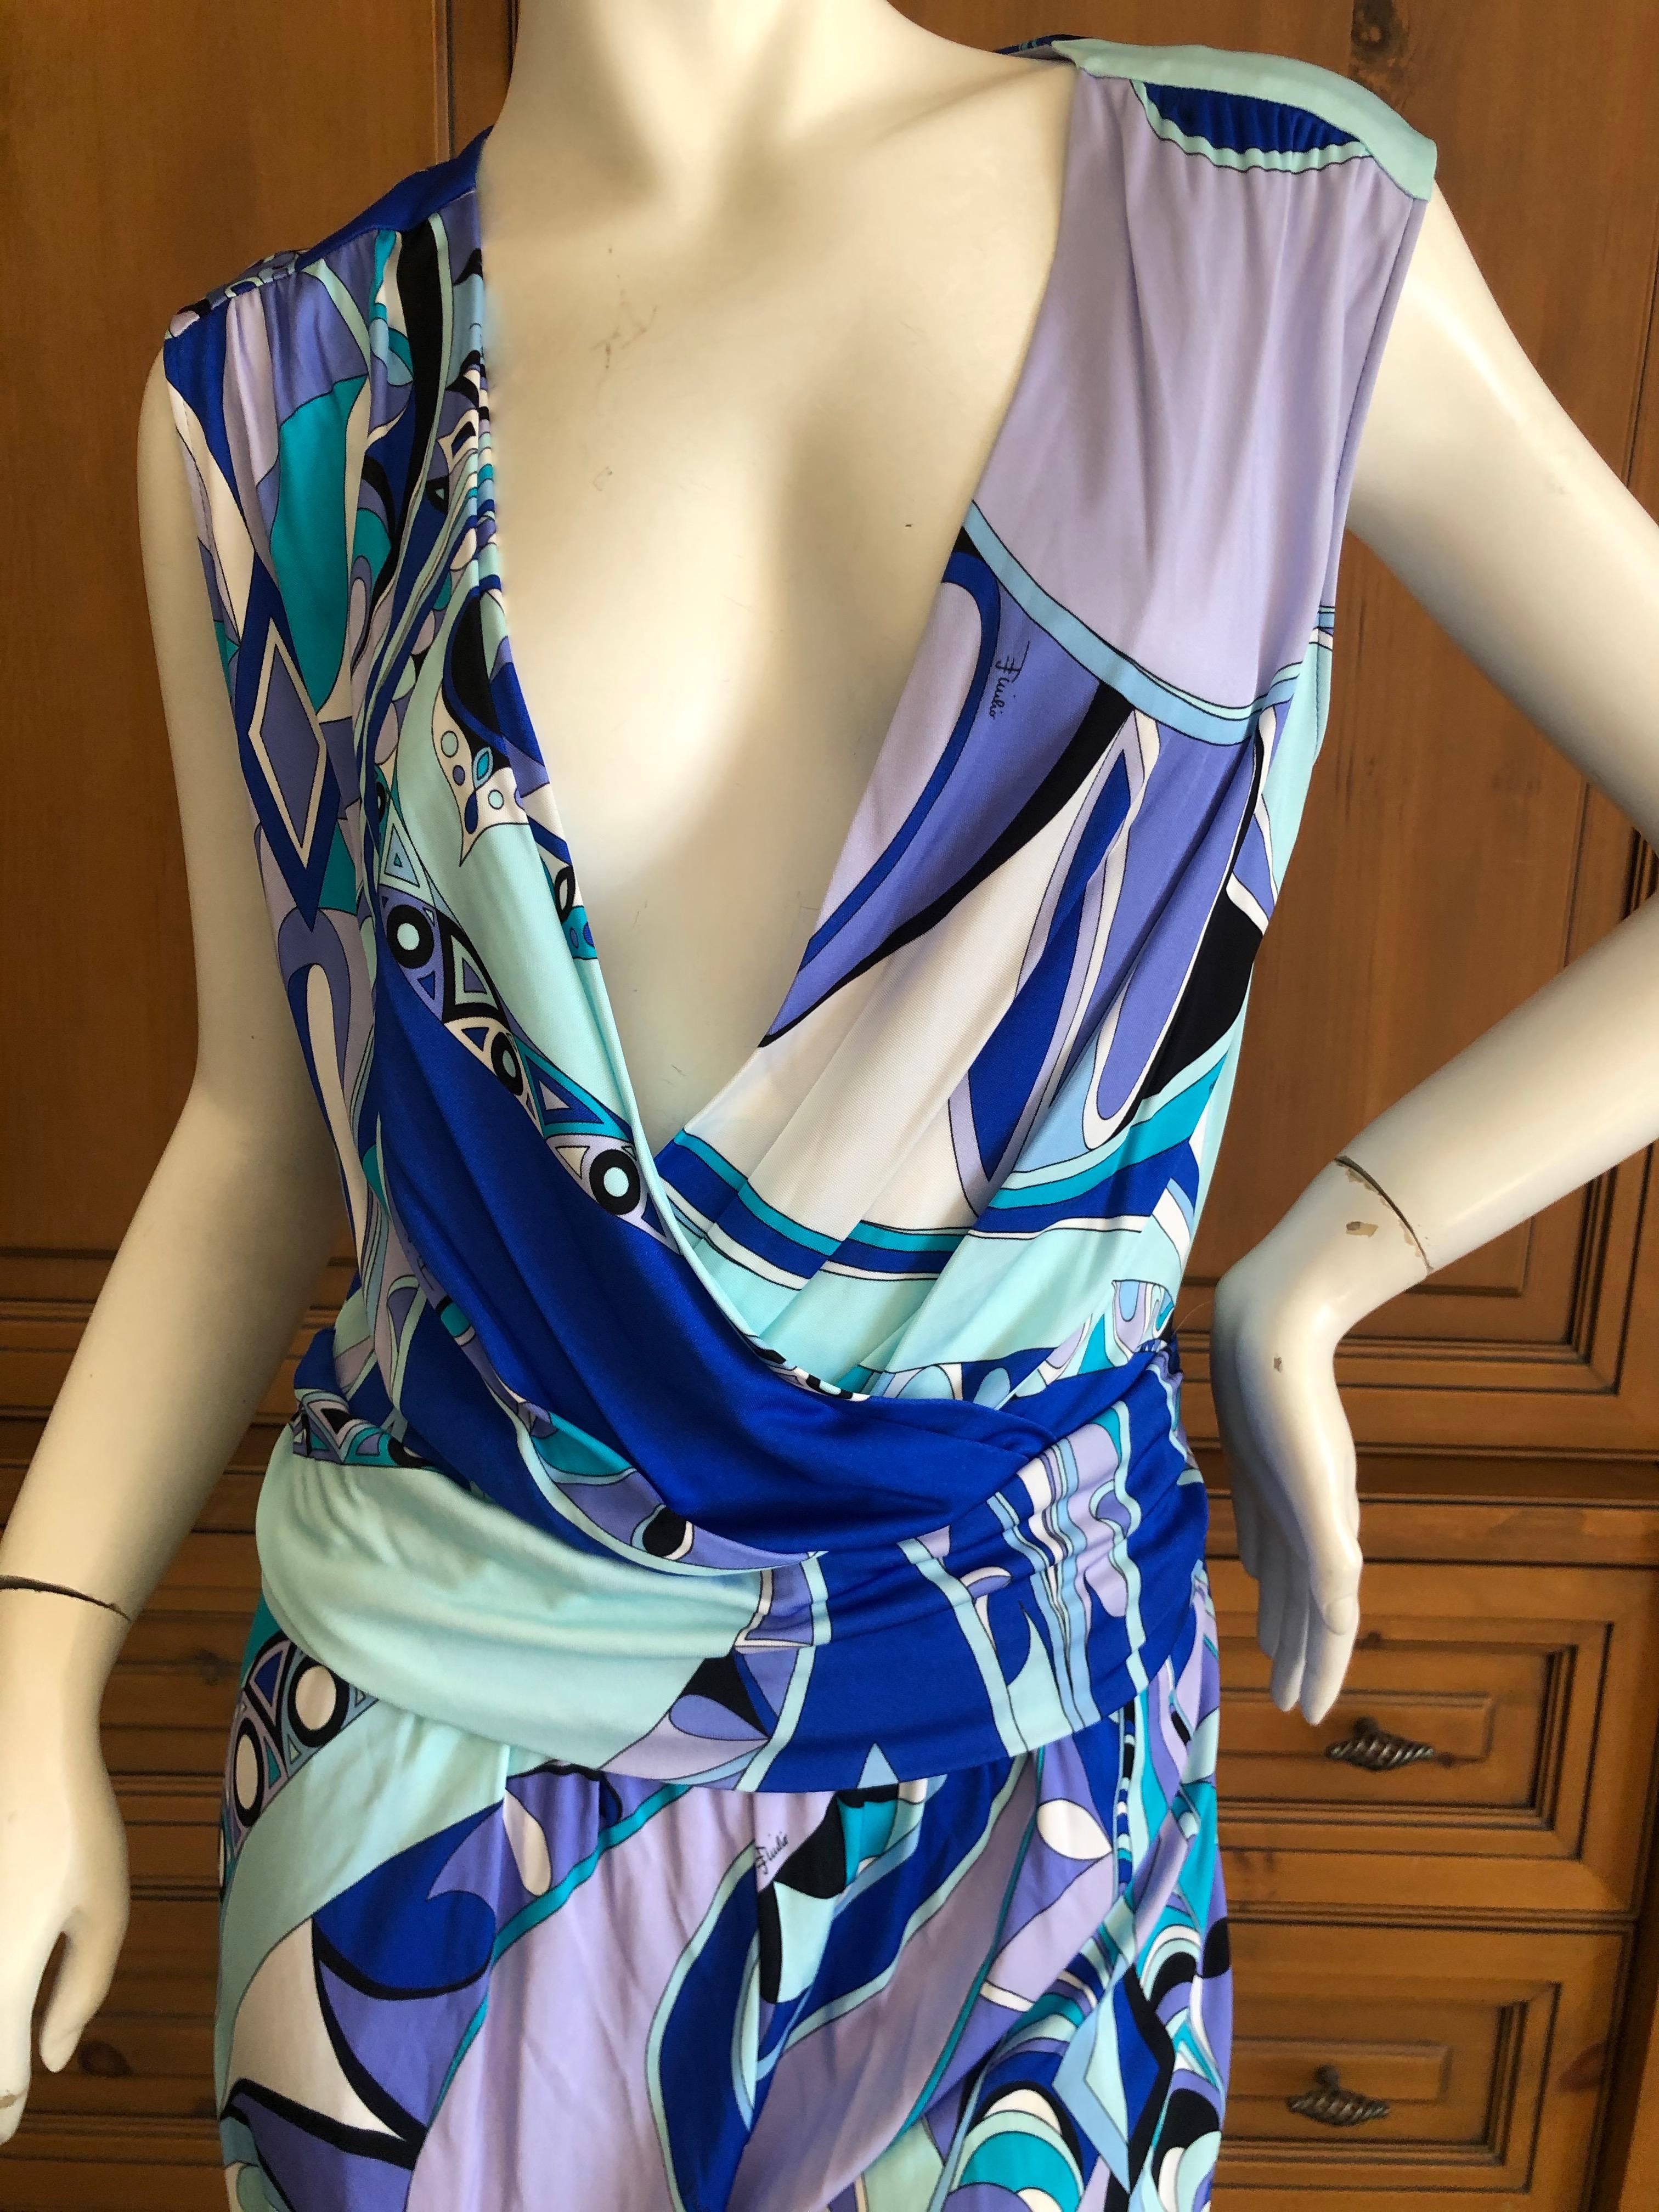 Emilio Pucci Colorful Low Cut Jumpsuit In Excellent Condition For Sale In Cloverdale, CA